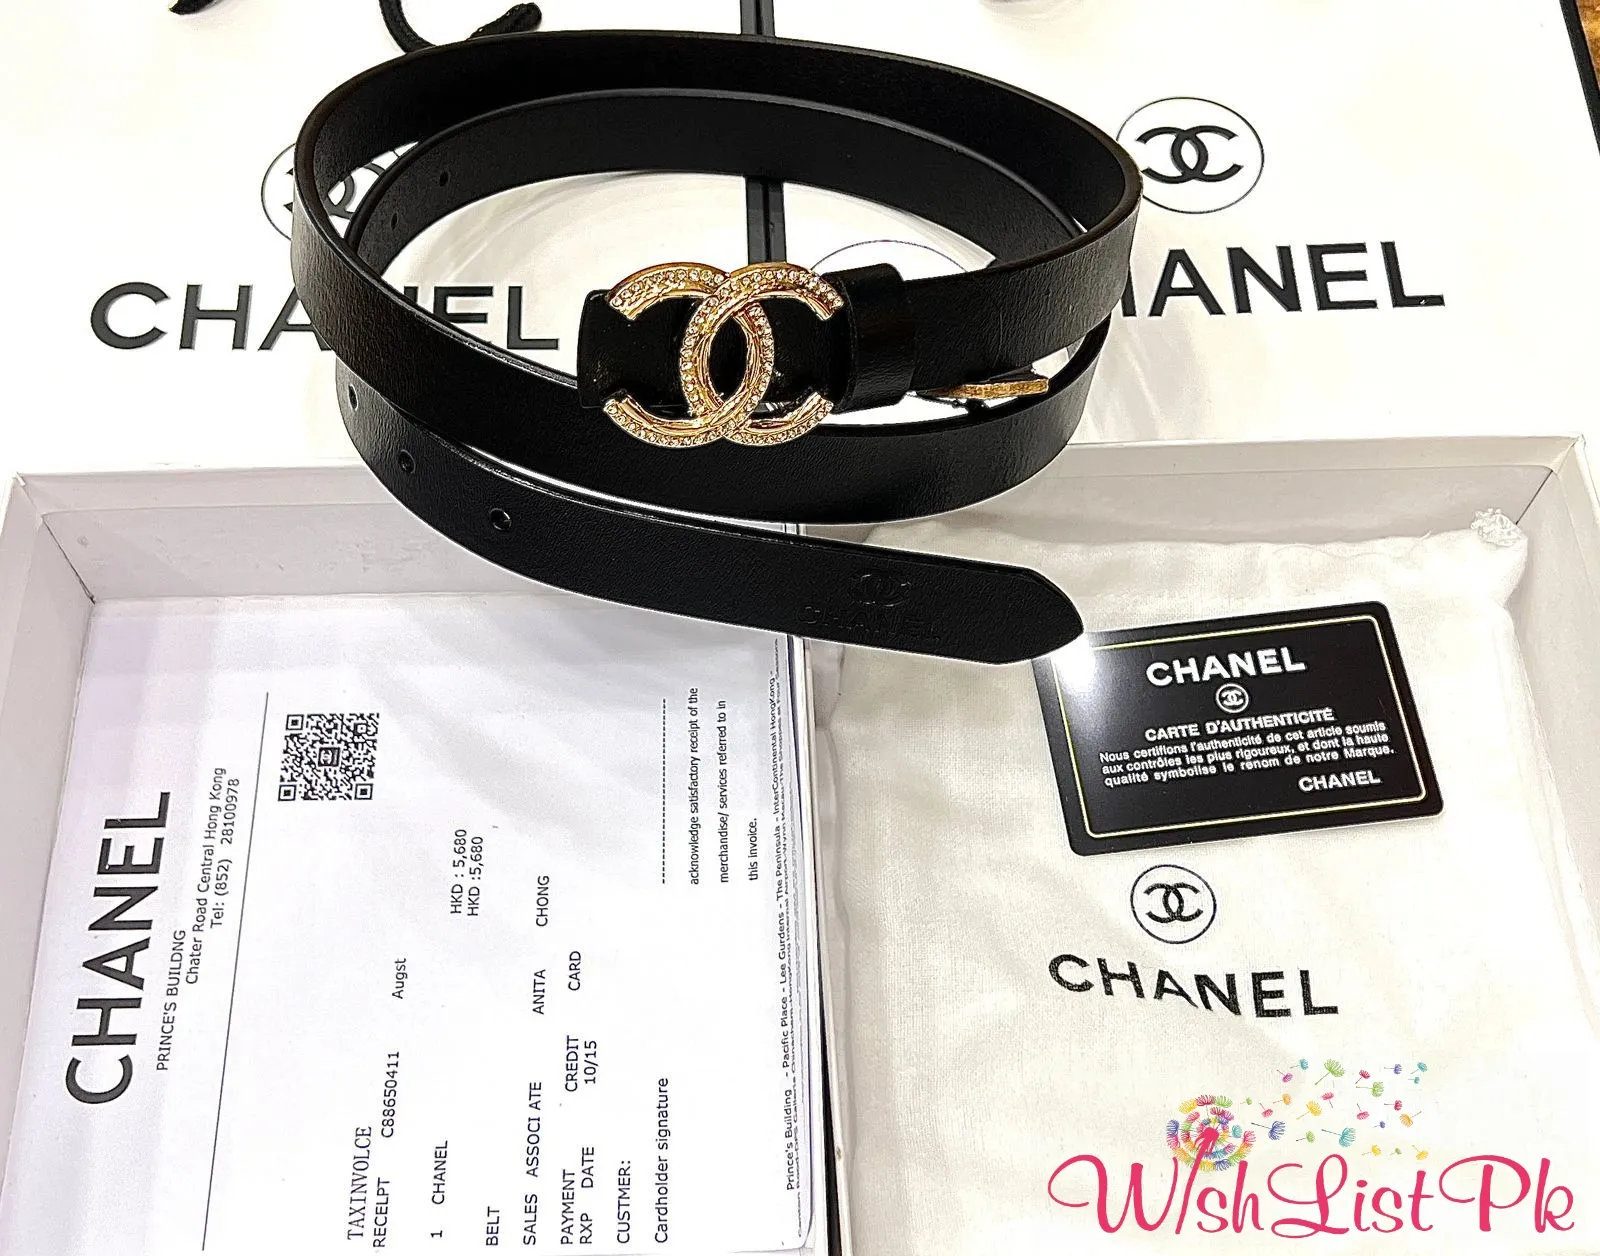 Chanel Waist Belt For Her With Original Packaging